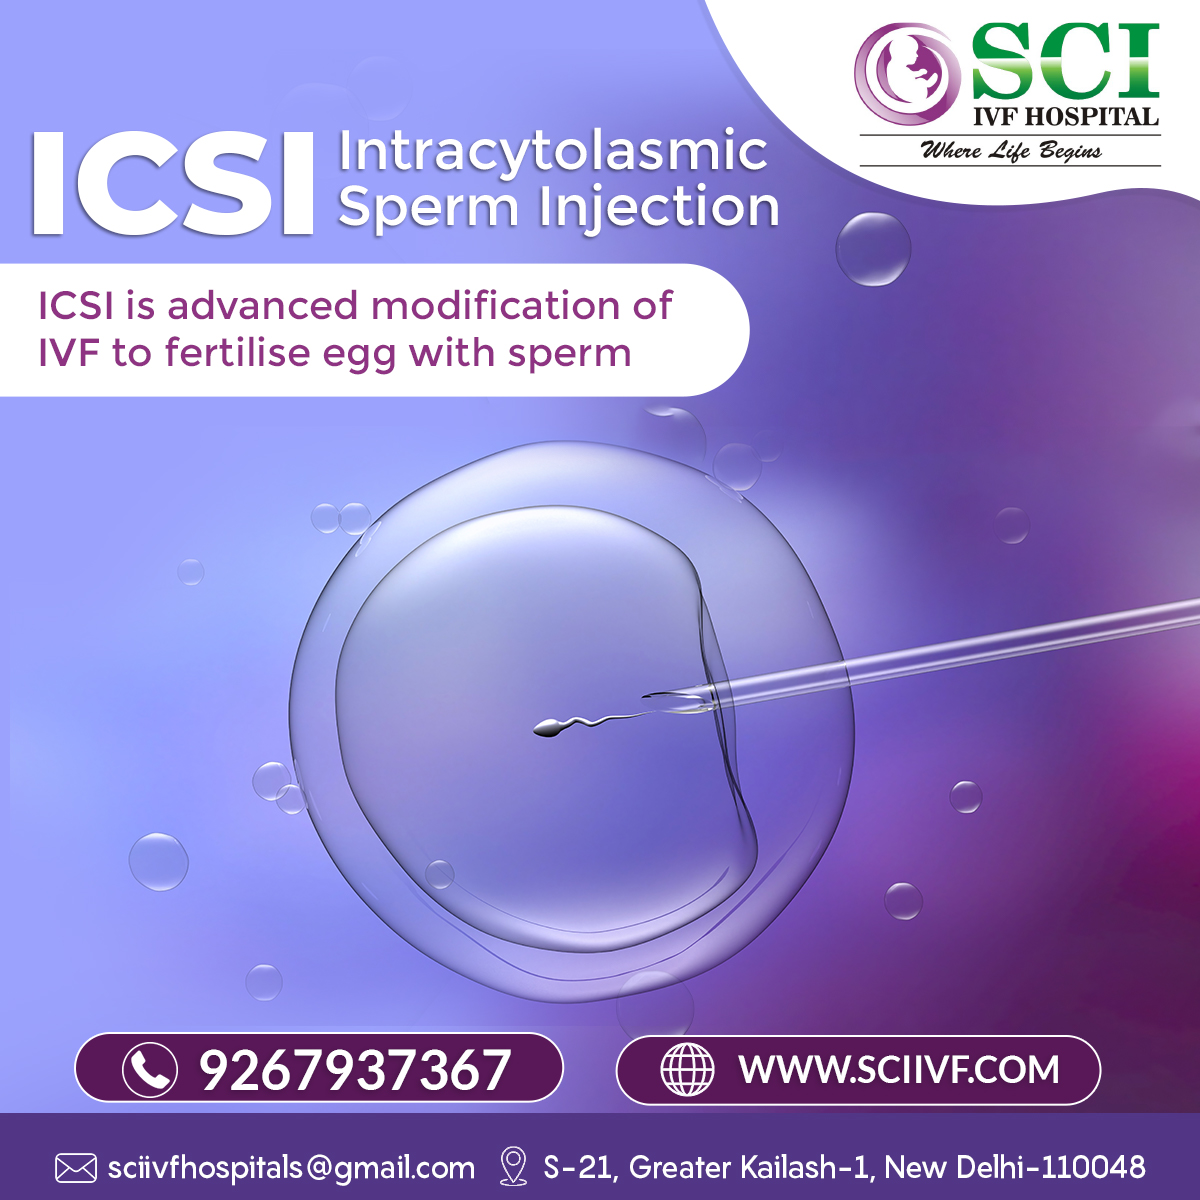 Ready to start your parenthood journey? Discover 𝗮𝗳𝗳𝗼𝗿𝗱𝗮𝗯𝗹𝗲 𝗜𝗖𝗦𝗜 𝘁𝗿𝗲𝗮𝘁𝗺𝗲𝗻𝘁 services at SCI IVF Hospital! Expert care, cutting-edge technology, and budget-friendly options await. sciivf.com/ivf-icsi-treat… #ICSI #IVF #SCIIVFHospital #DrShivaniSachdevGour